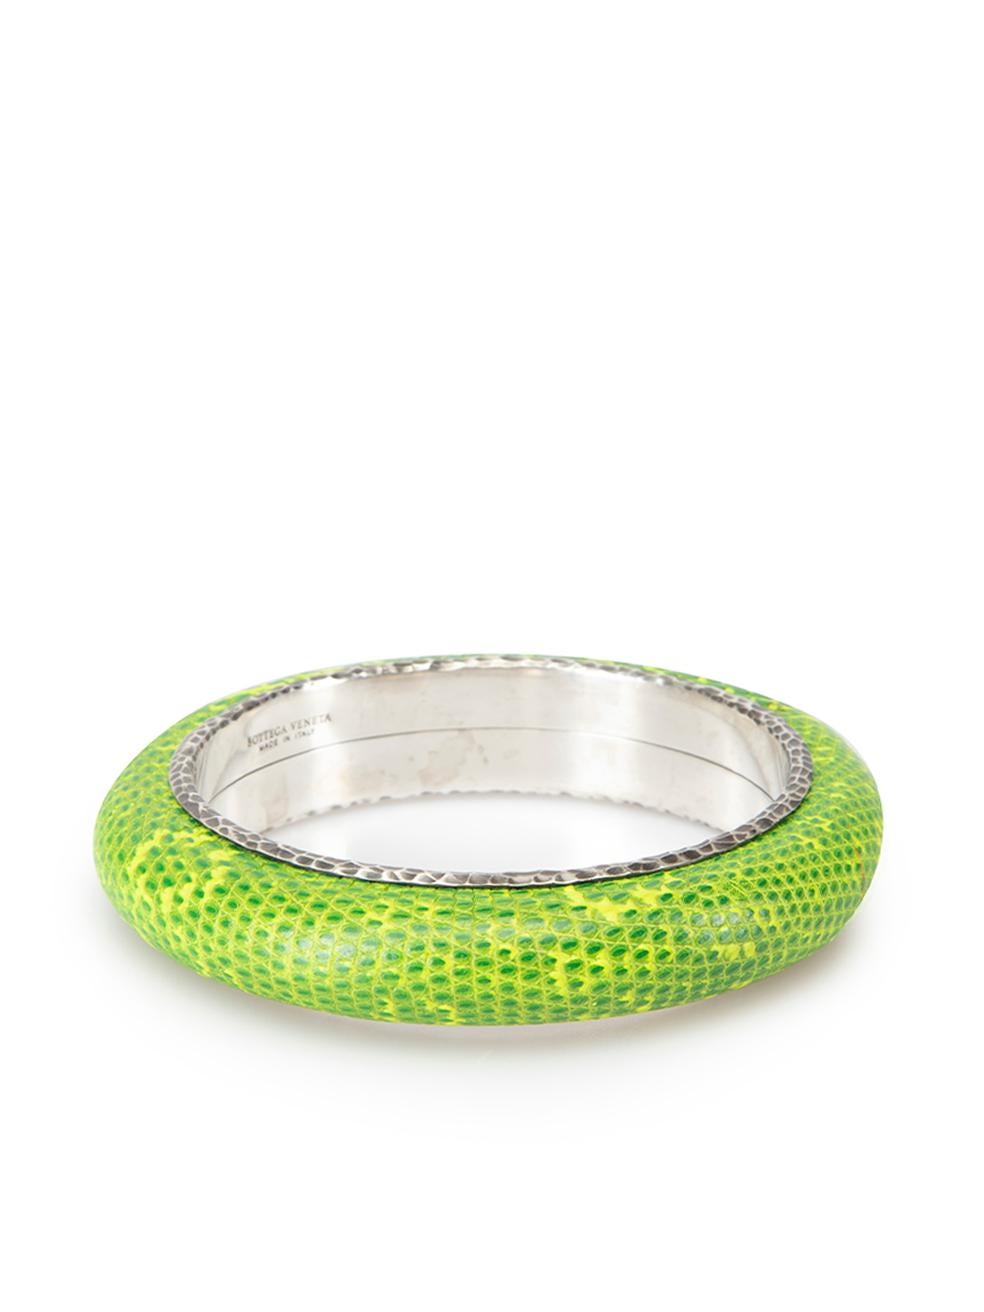 CONDITION is Very good. Hardly any visible wear to bangle is evident on this used Bottega Veneta designer resale item. 



Details


Green

Lizard leather

925 Sterling sliver bangle





Made in Italy



Composition

Lizard leather and 925 Sterling